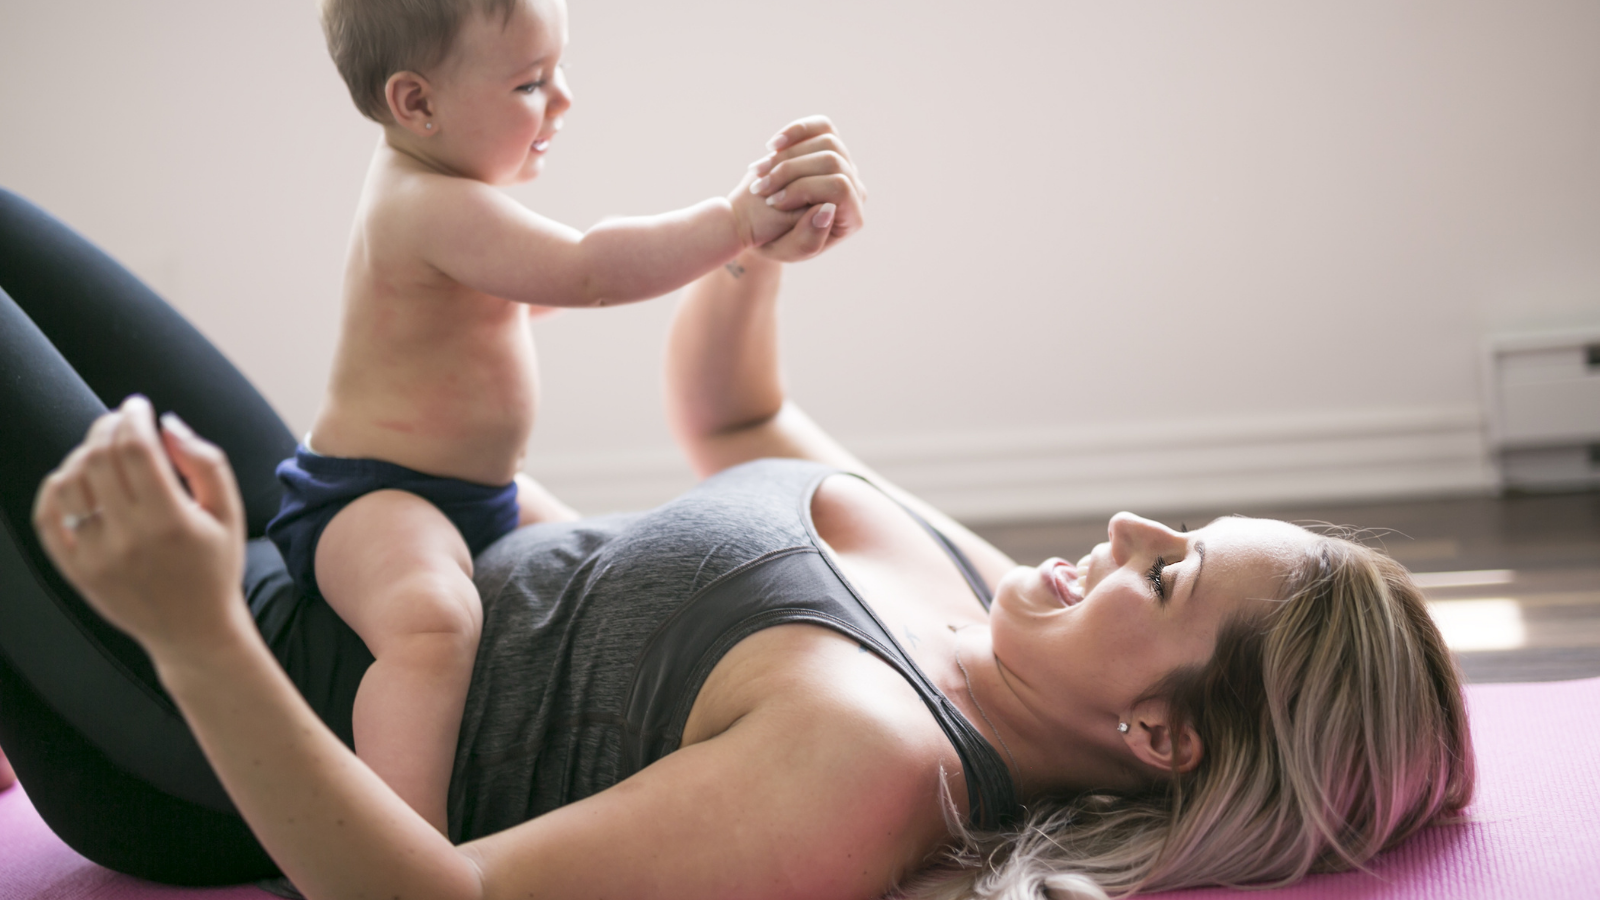 A young mother does physical yoga exercises together with her baby